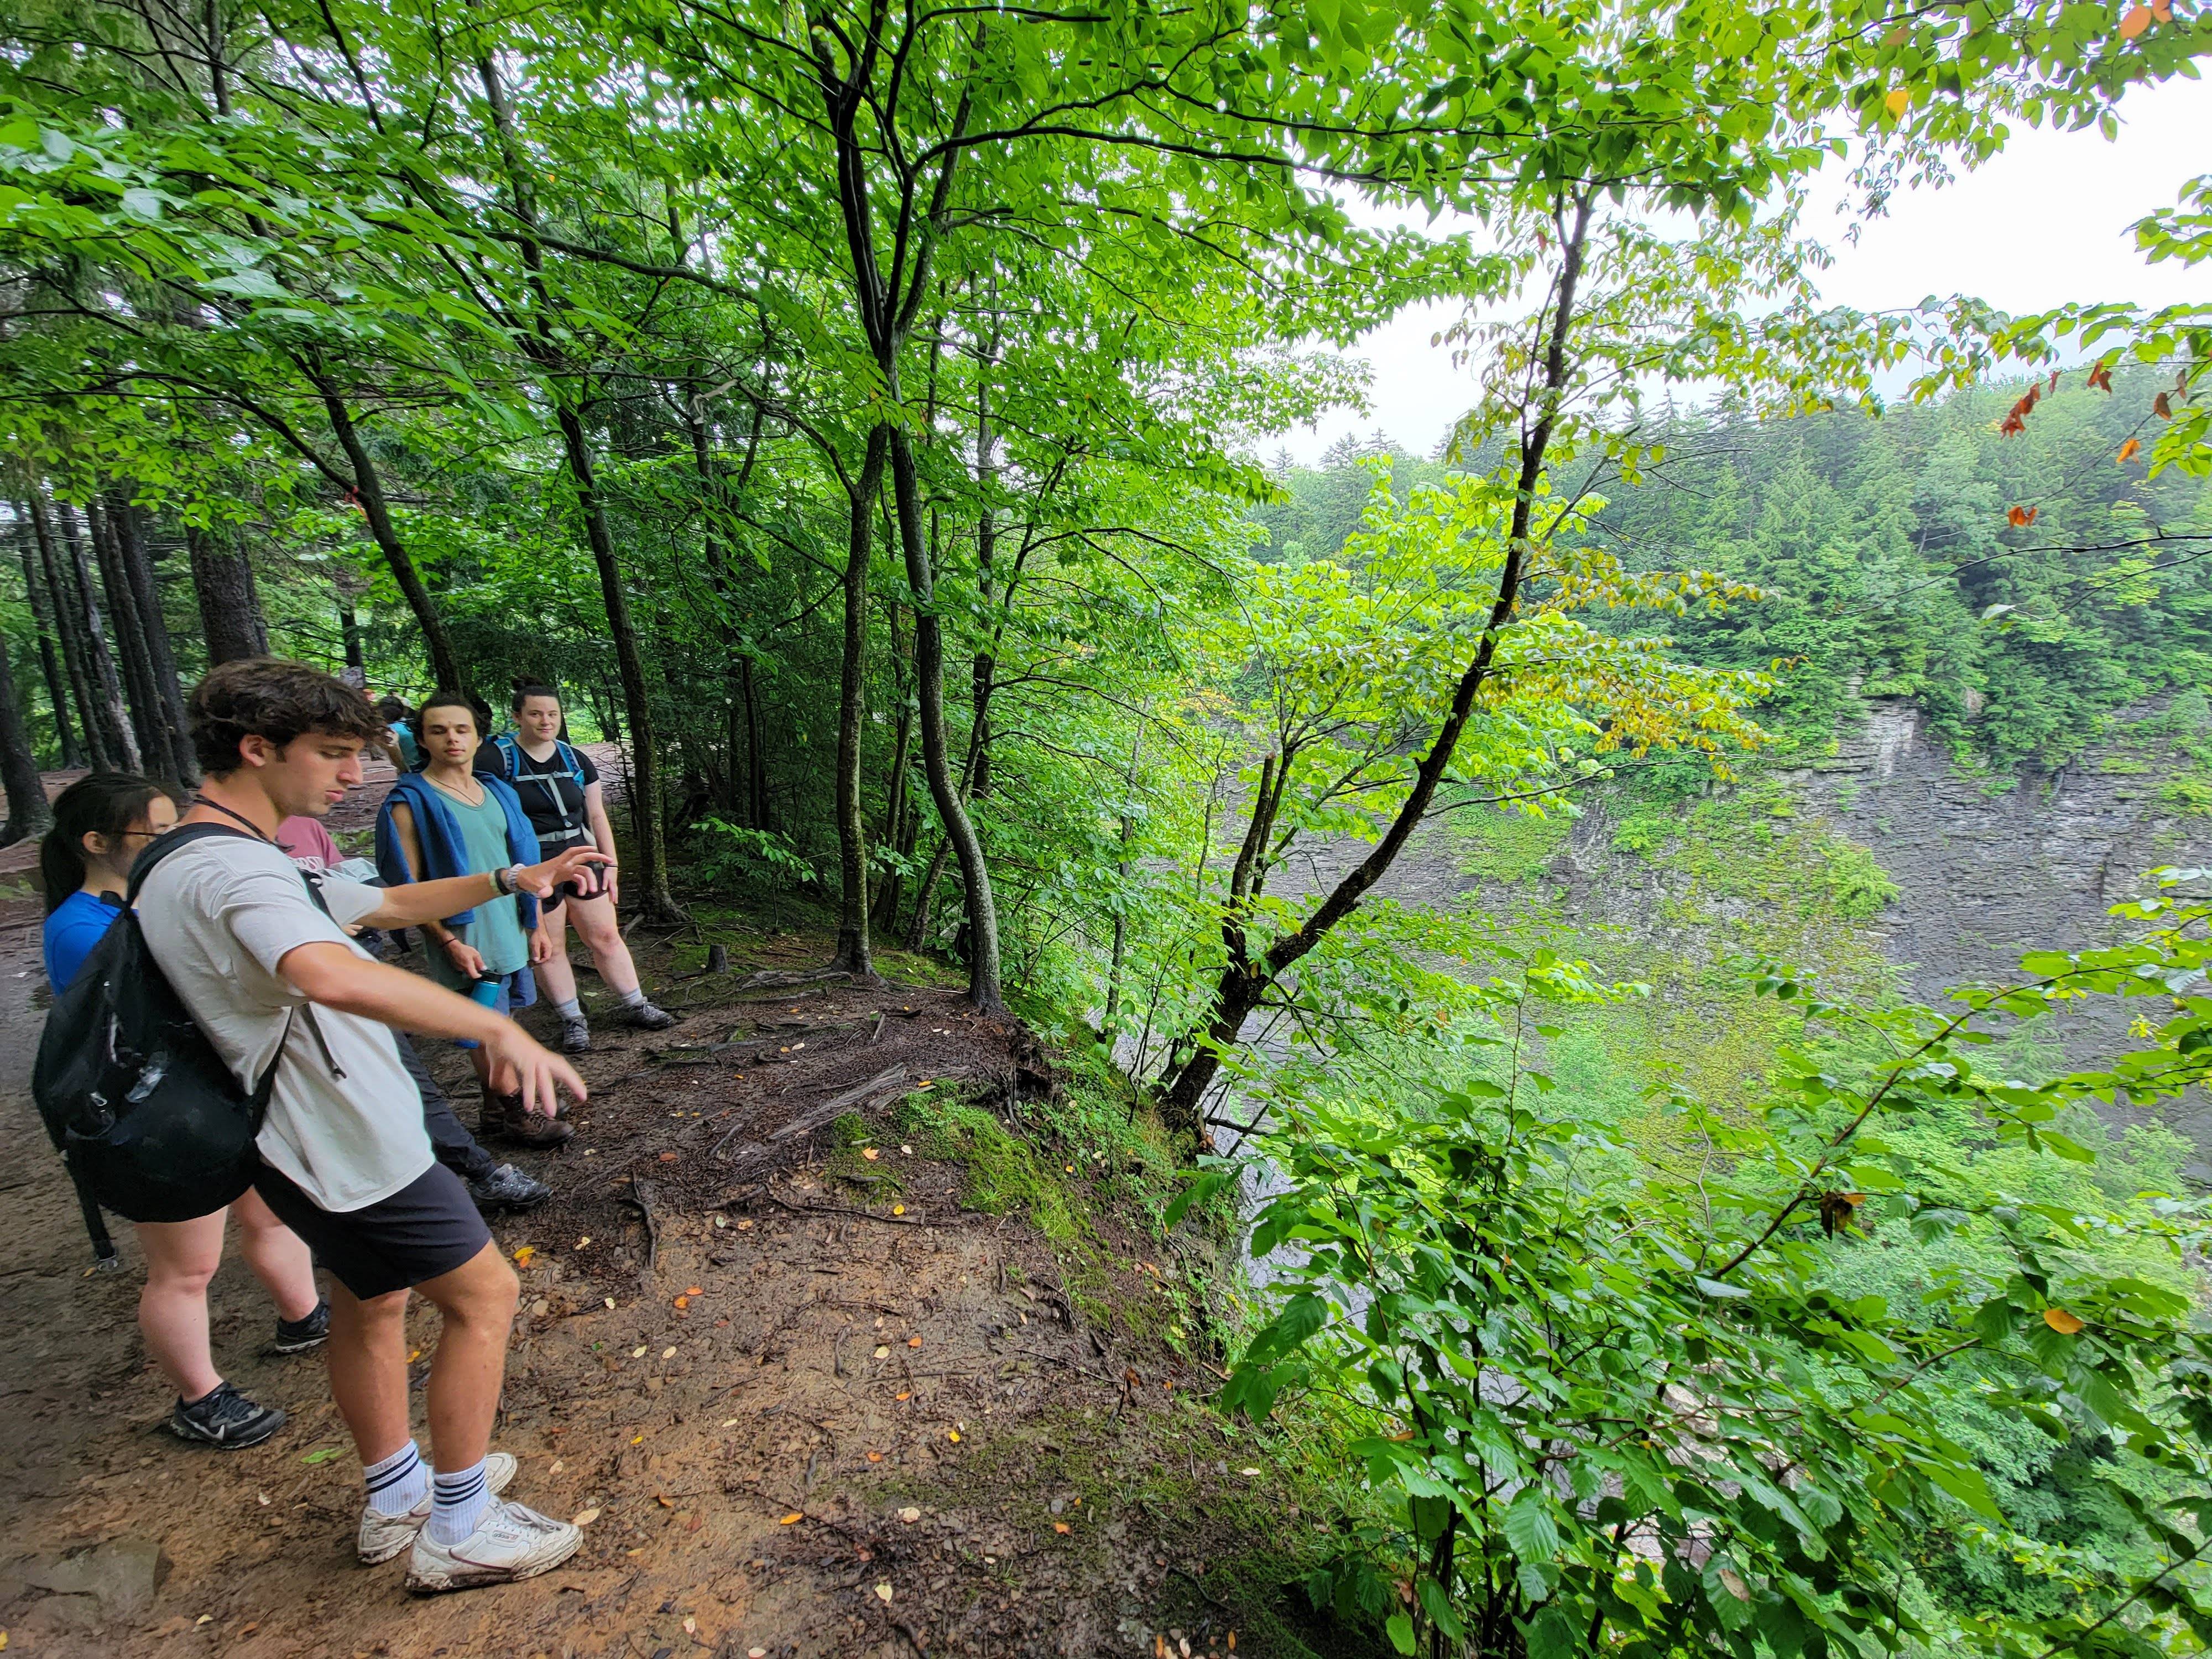 Students walking on a hiking trail